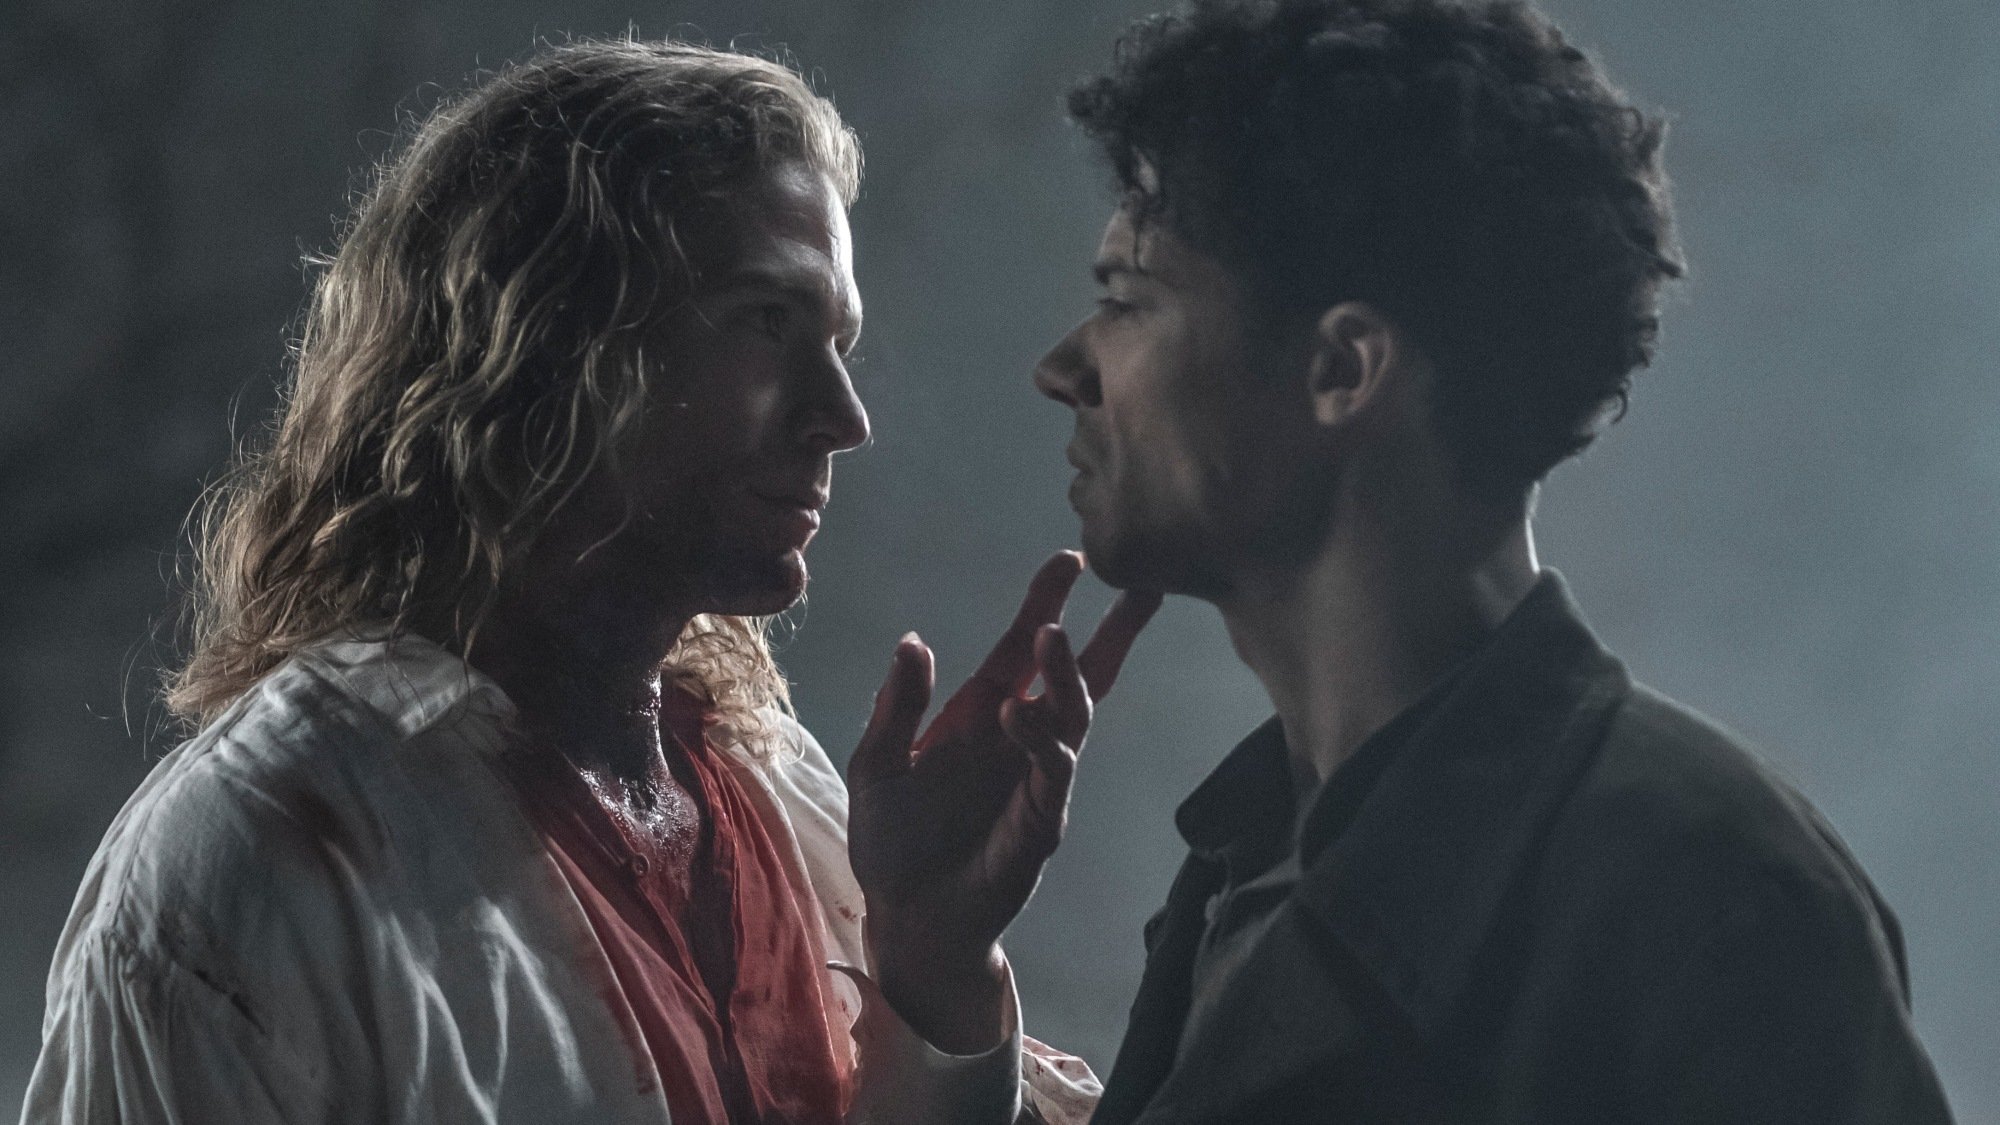 Sam Reid and Jacob Anderson return as Lestat and Louis in "Interview with the Vampire: Part II."